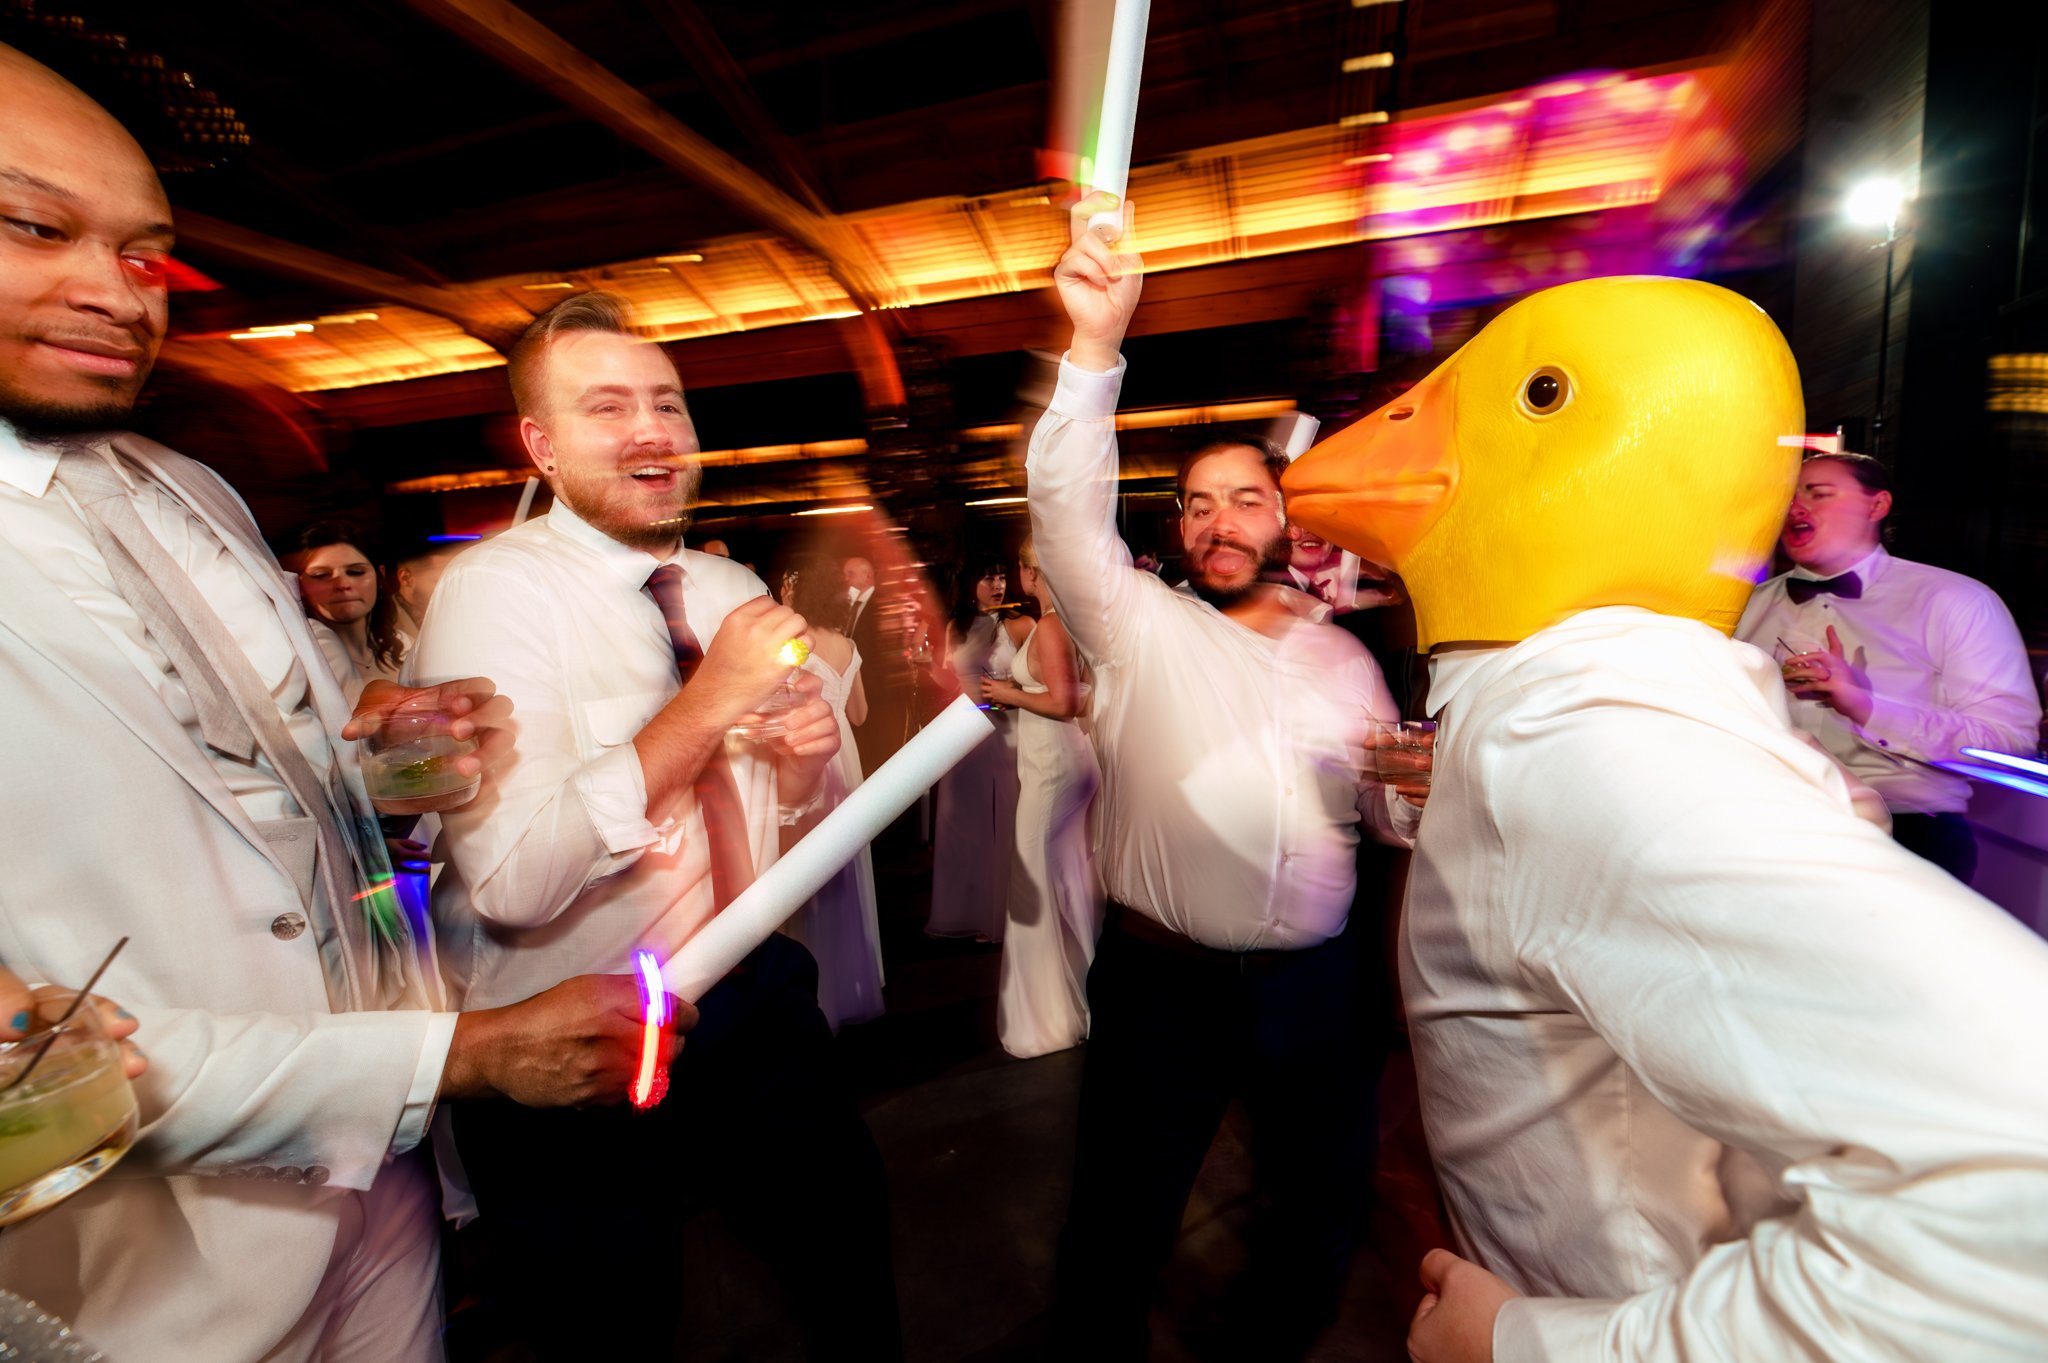 A man wearing a yellow duck mask at Seely Pavilion for a Grove Park Inn wedding.